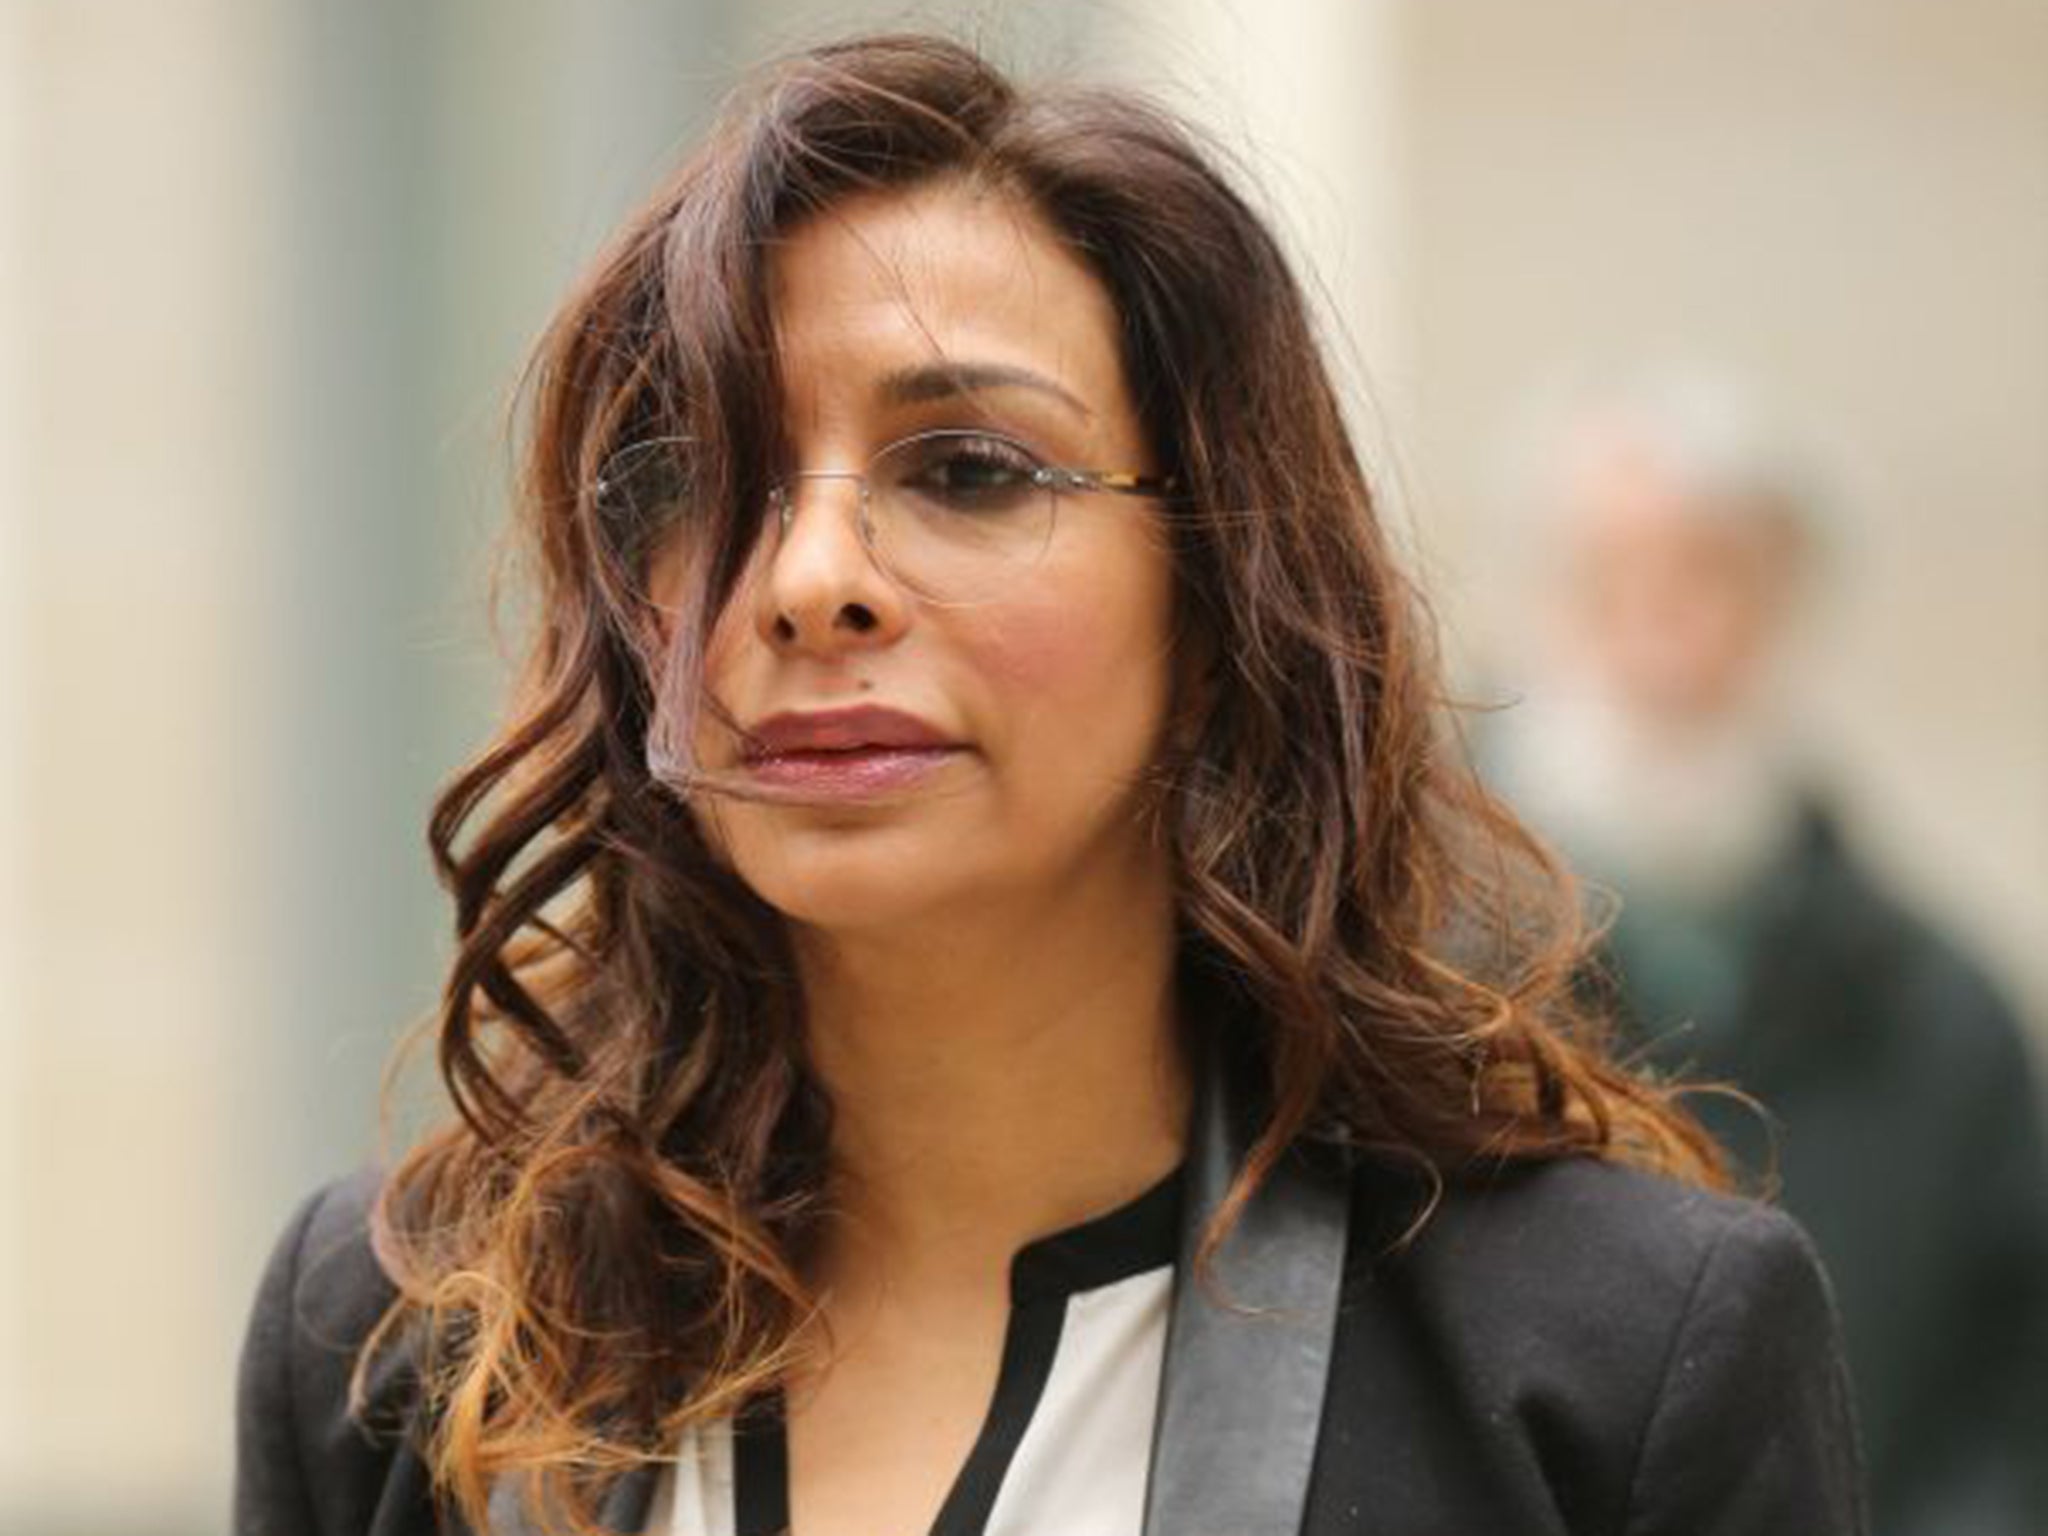 Shobna Gulati accused the Sunday Mirror of invading her privacy with a front-page story in 2003 that speculated on the parentage of her son